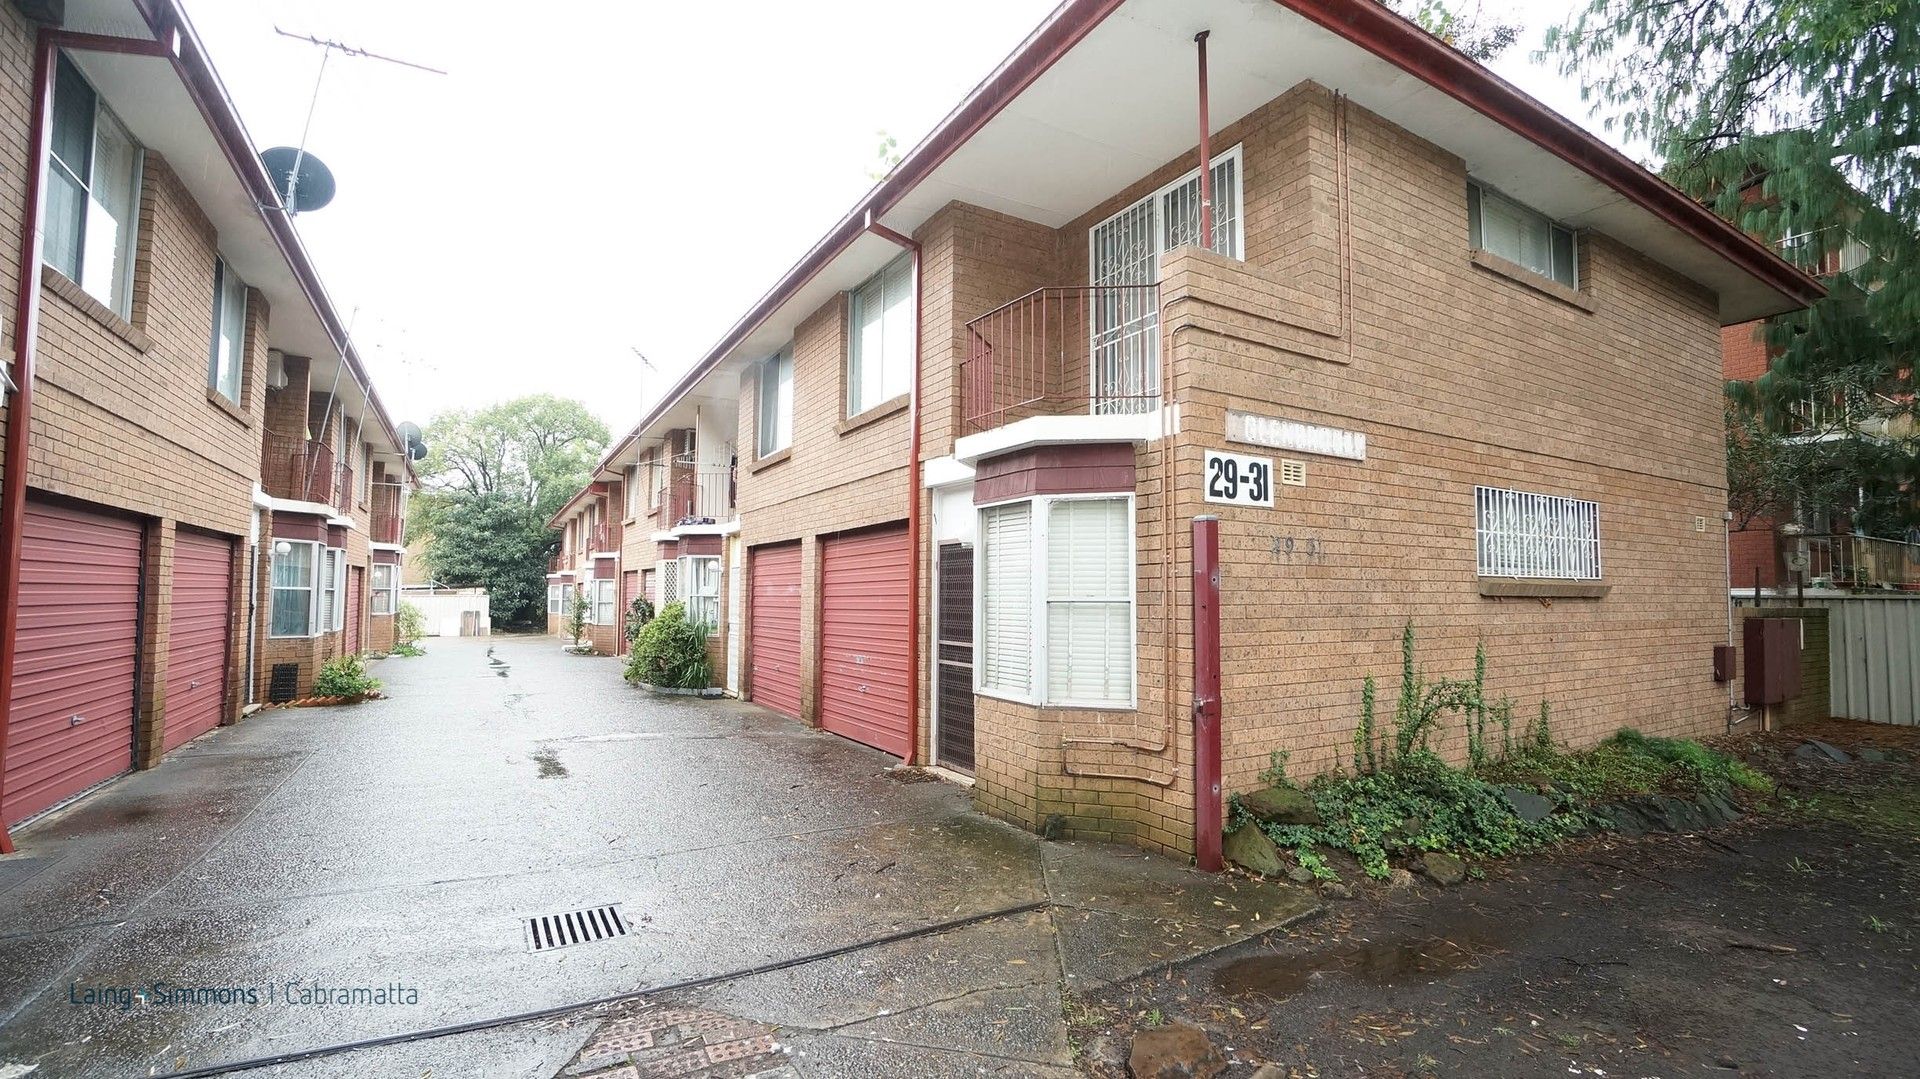 2 bedrooms Townhouse in 7/29-31 Mcburney Road CABRAMATTA NSW, 2166